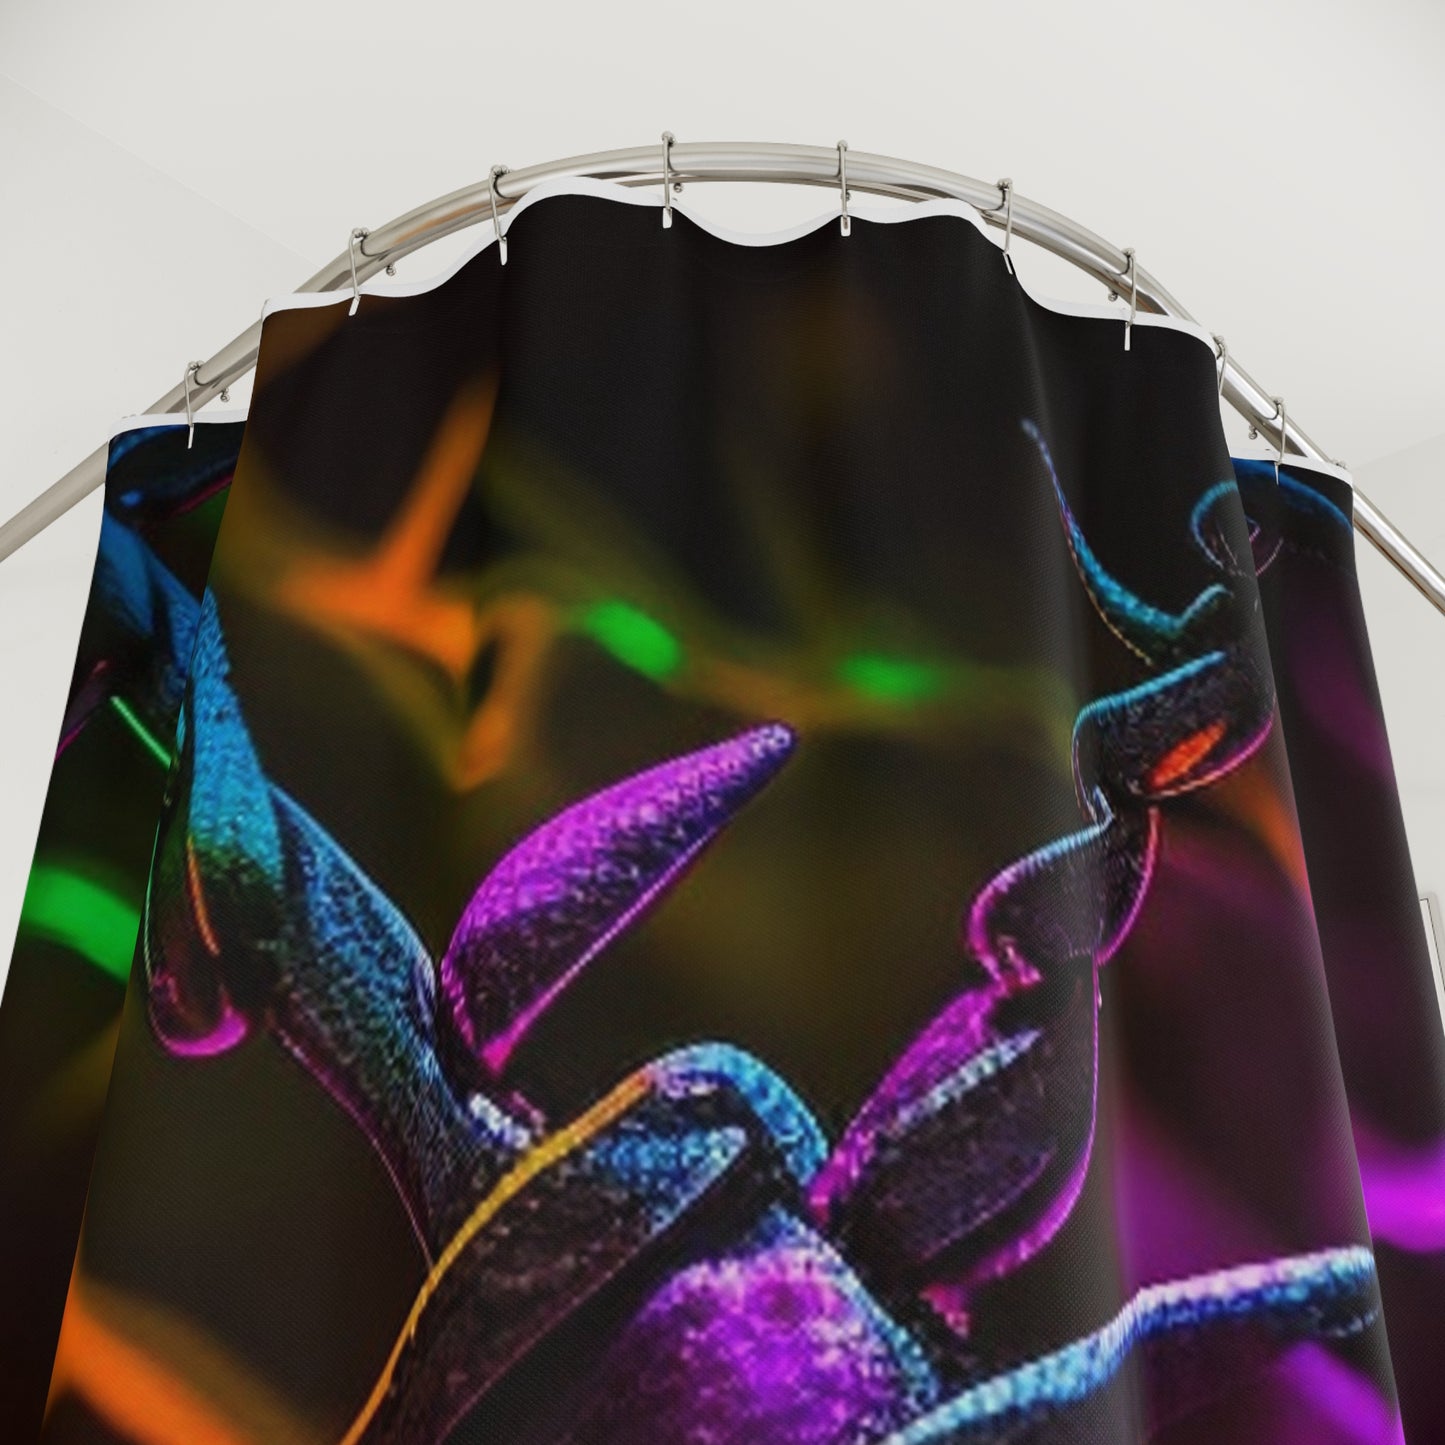 Polyester Shower Curtain Macro Neon Barb 4